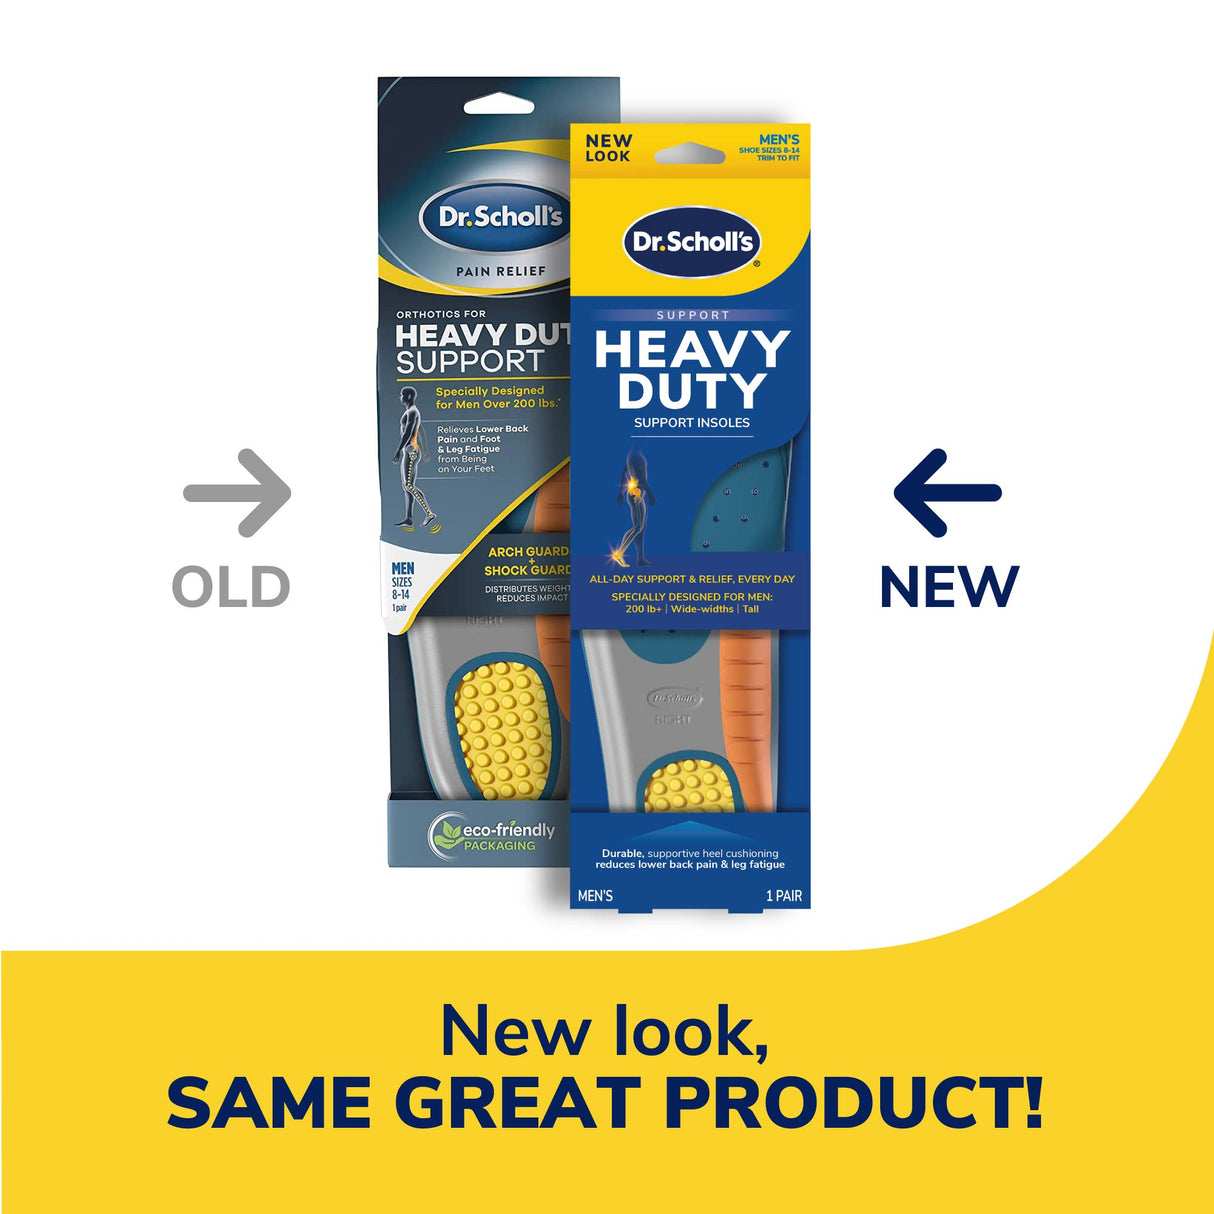 image of the old packaging and of the new packaging of the heavy duty insole